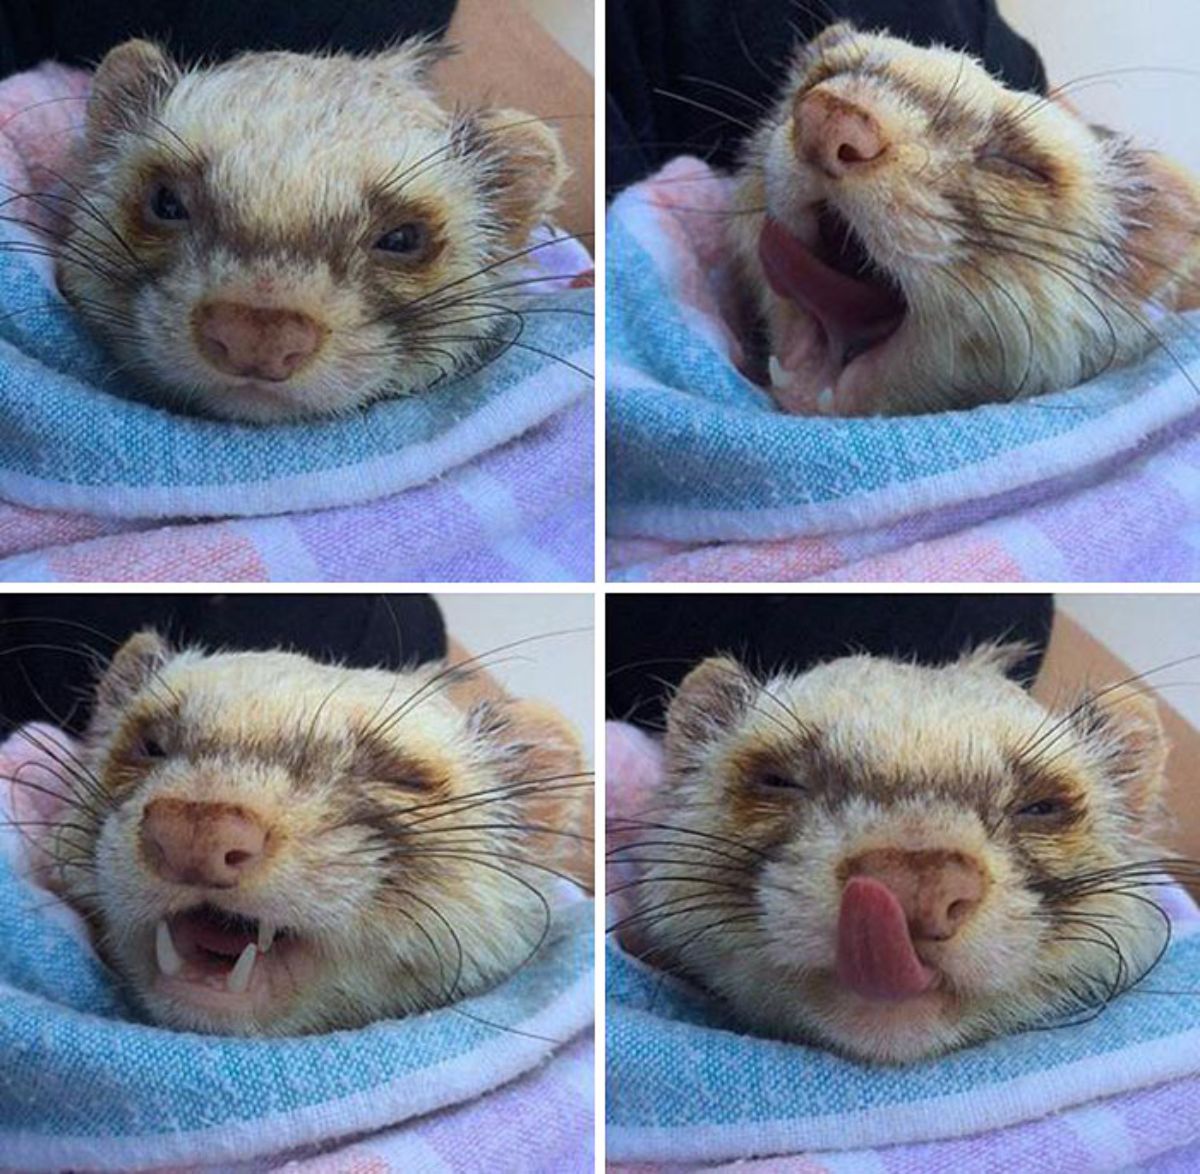 4 photos of close ups of a brown ferret with its mouth open and tongue sticking out in 3 of them